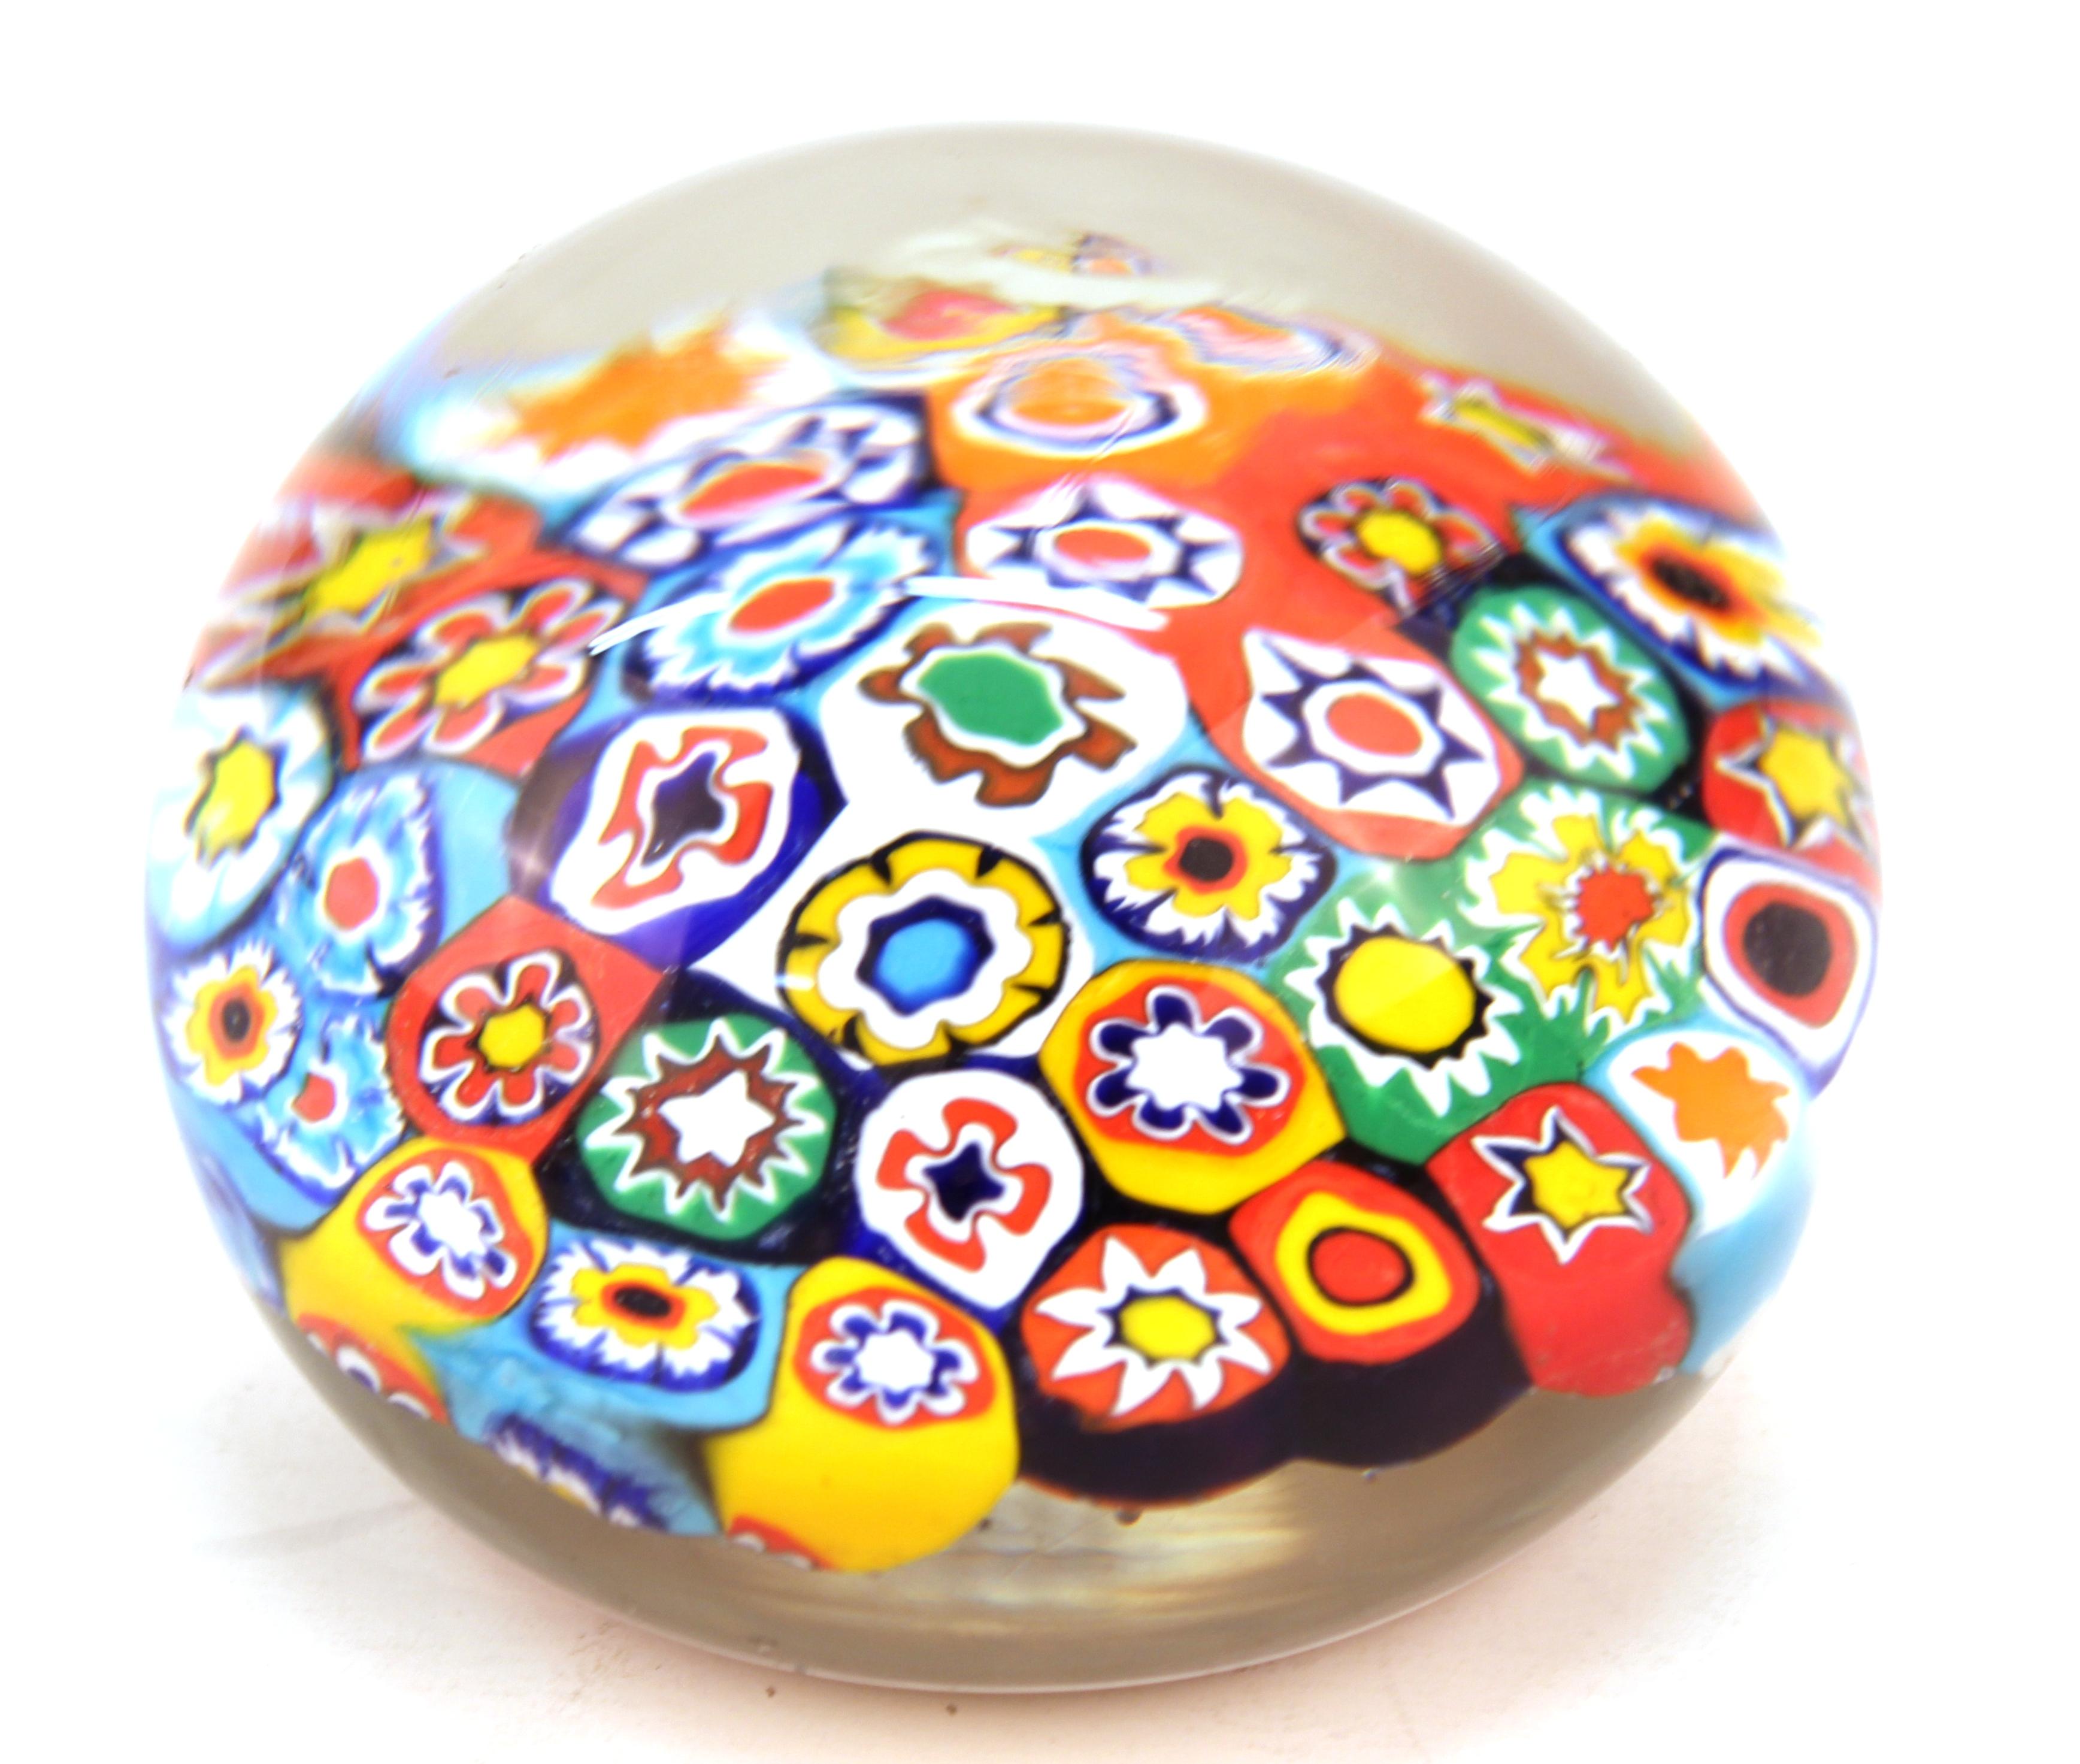 Italian Mid-Century Modern Murano art glass paperweight with millefiori floral motif. The piece has an old Italian label on the bottom and is in great vintage condition.